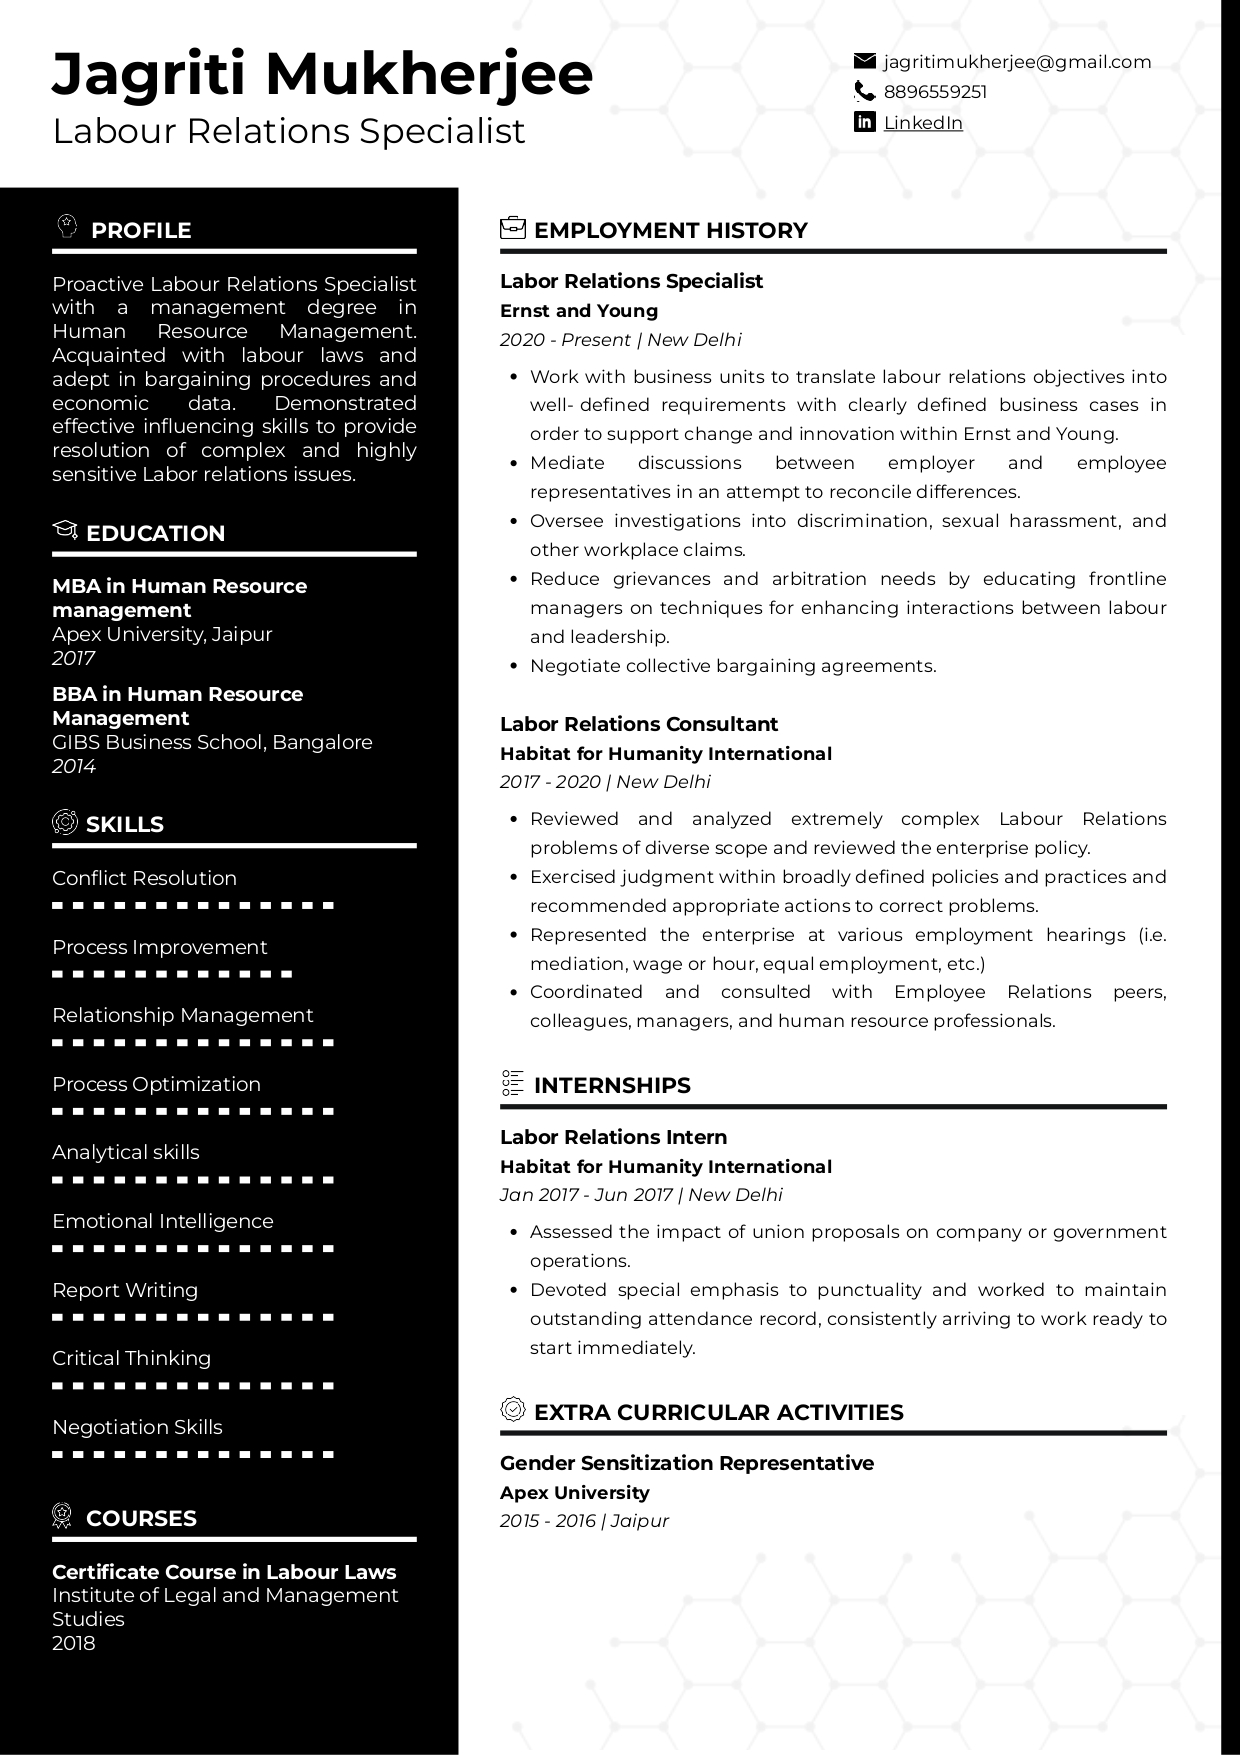 Resume of Labour Relations Specialist